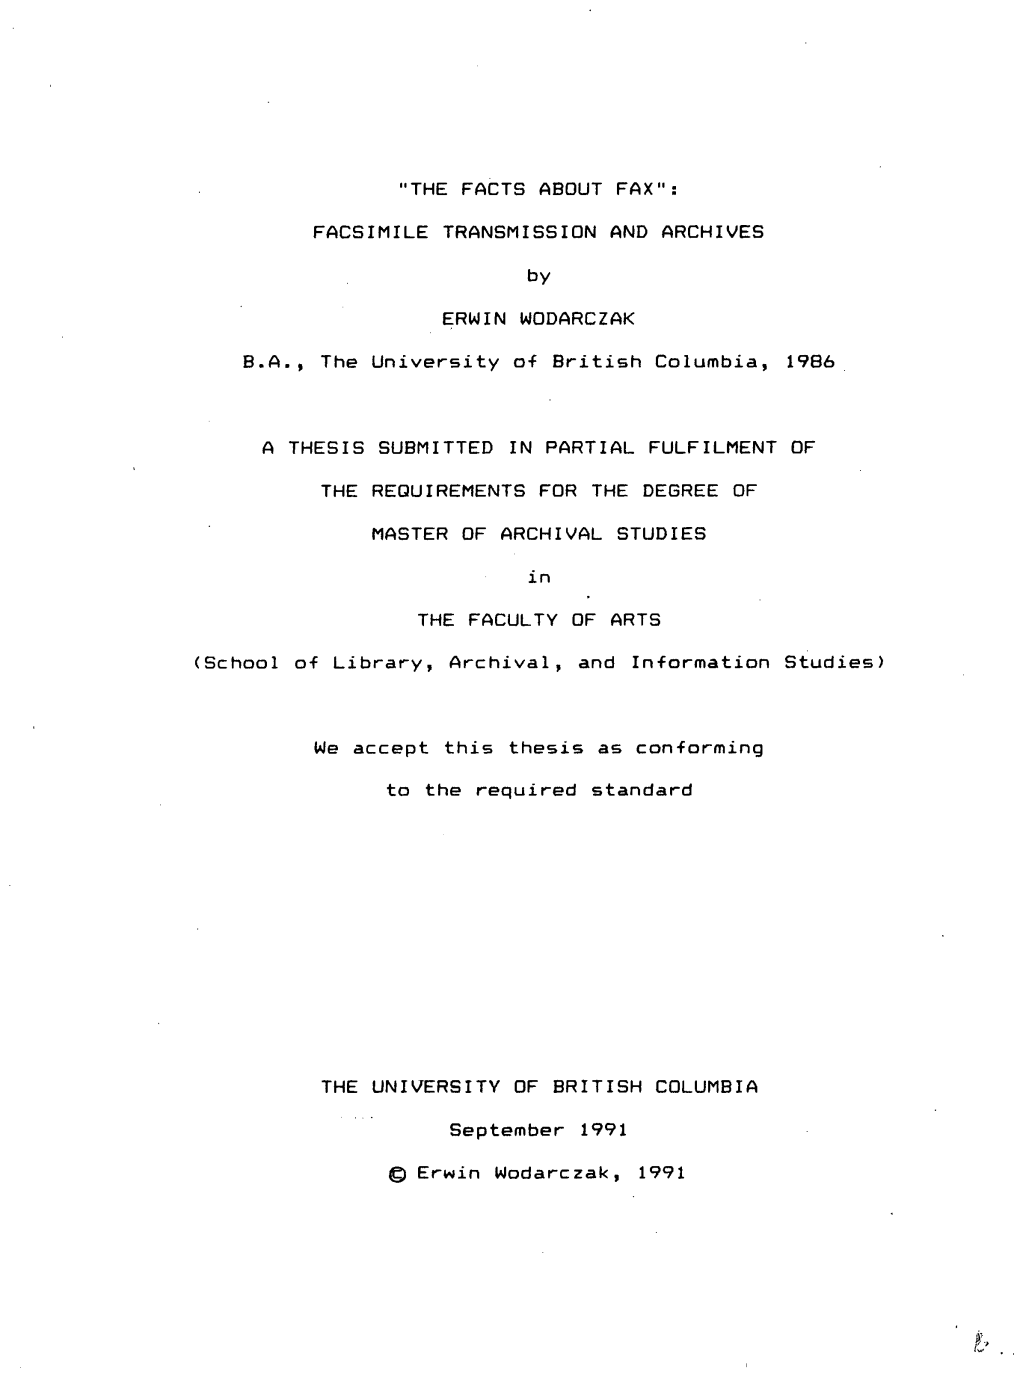 "THE FACTS ABOUT FAX": FACSIMILE TRANSMISSION and ARCHIVES by ERWIN WODARCZAK B.A., the University O-F British Columbi